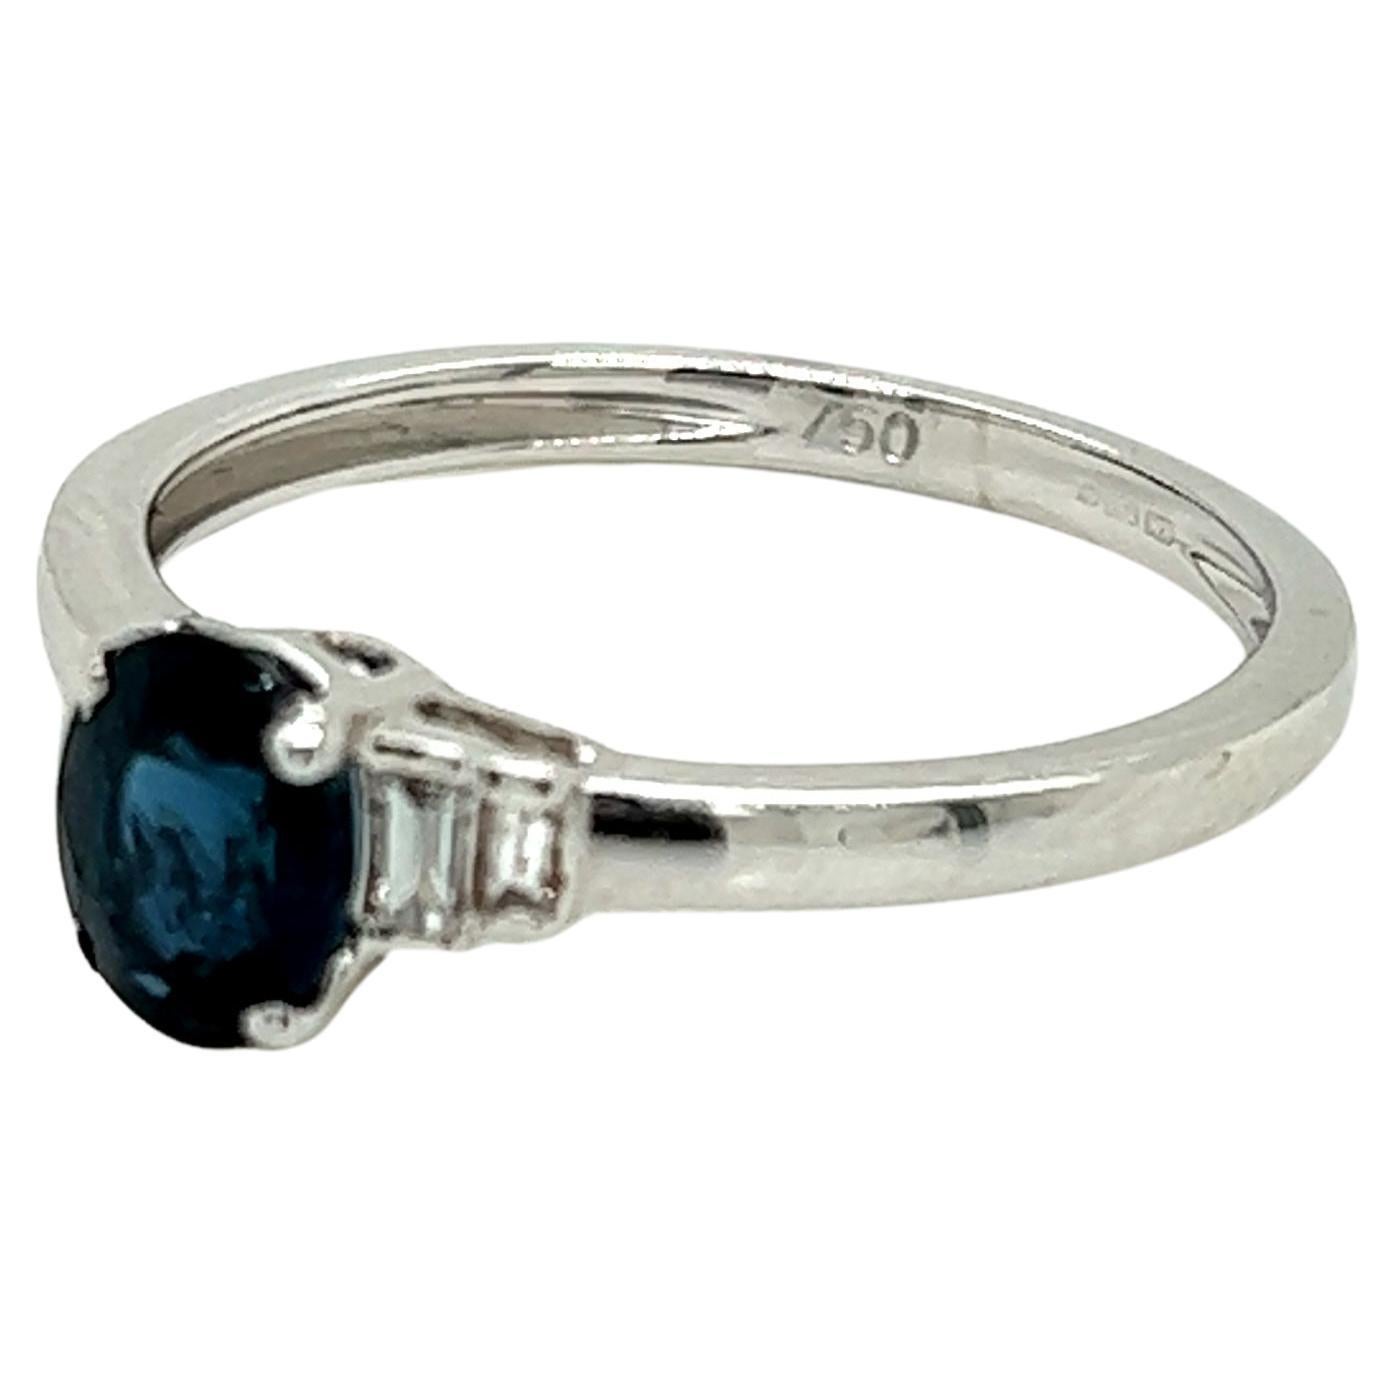 0.79 Carat Oval cut Blue Sapphire and Diamond Ring in 18K White Gold